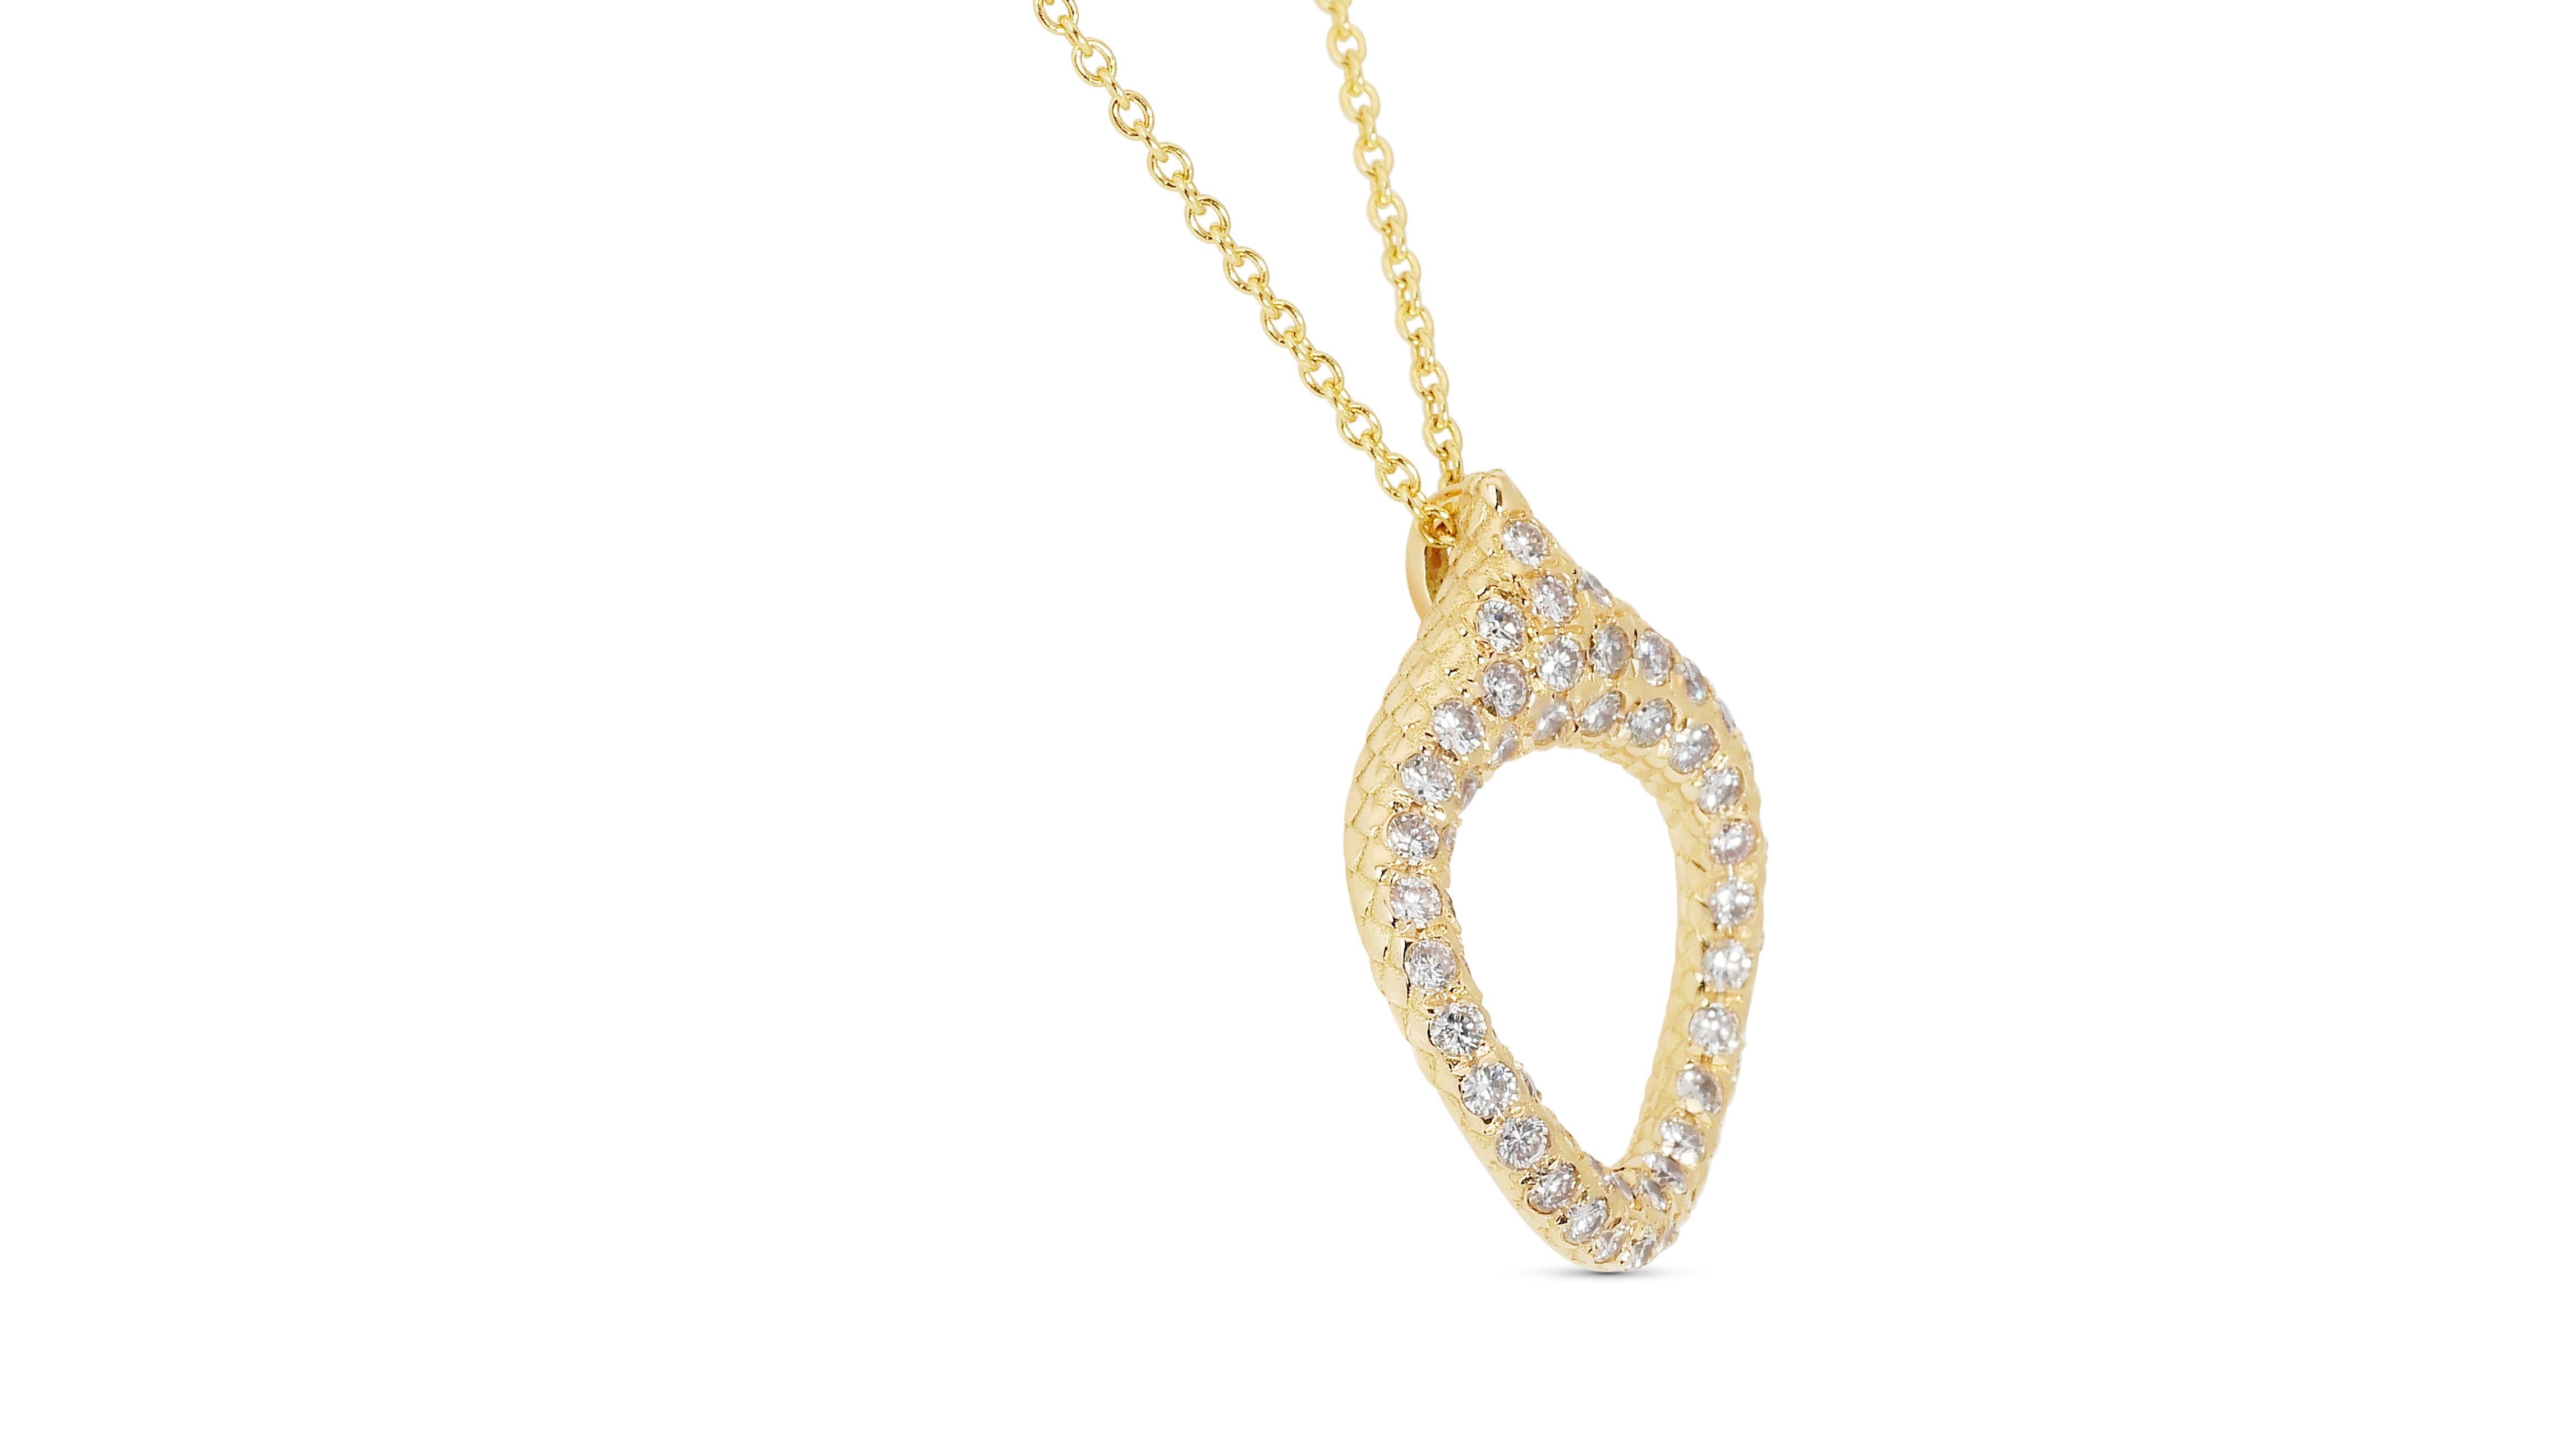 Dazzling 18k Yellow Gold Necklace w/ 1.16 Carat Natural Diamonds IGI Certificate For Sale 2